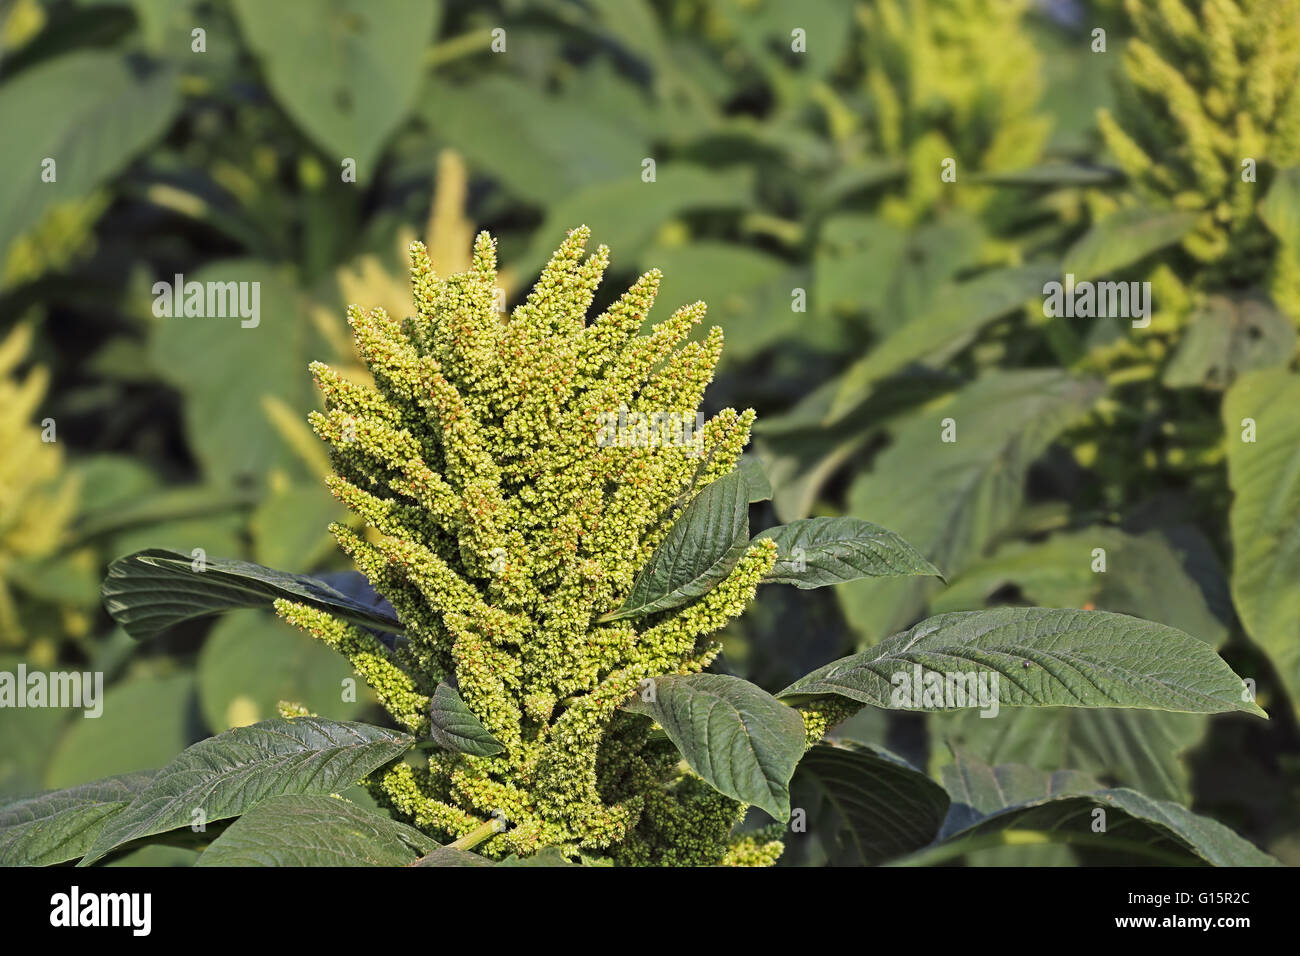 Indian Green Amaranth, cultivated as leaf vegetables, cereals and ornamental plants. Genus is Amaranthus. Stock Photo